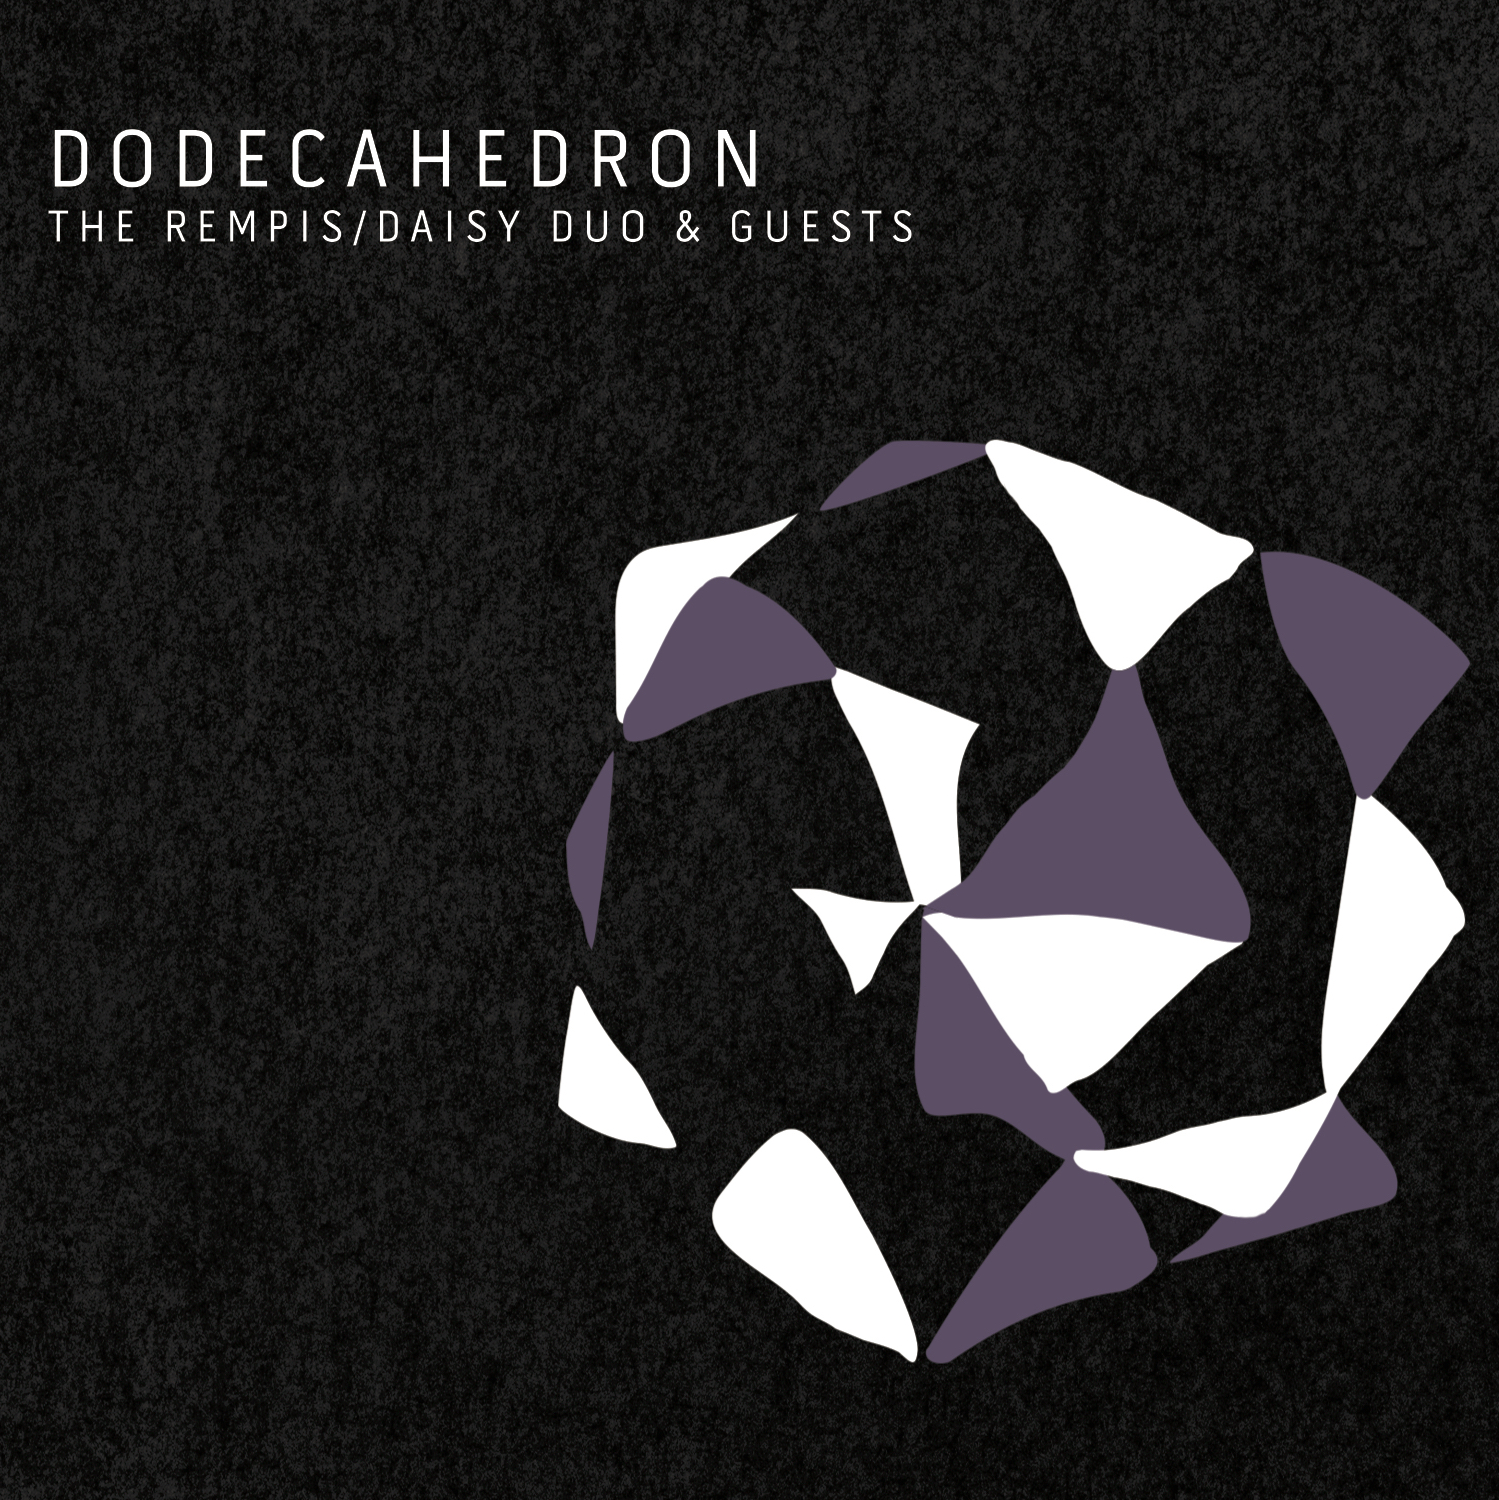 Dodecahedron Front.jpg